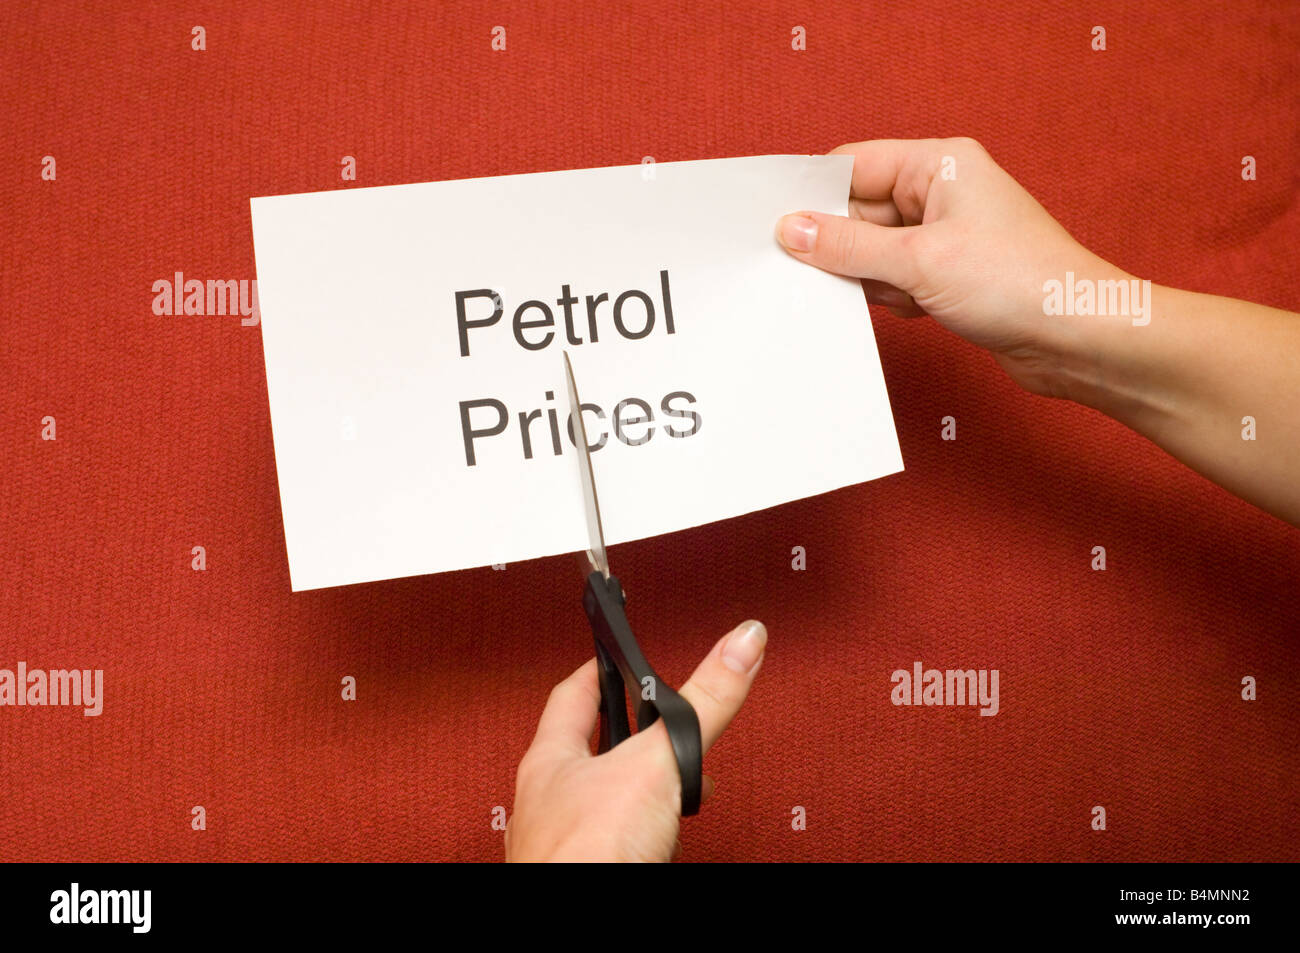 Picture of person cutting a piece of paper with "petrol prices" written on it using a pair of scissors Stock Photo